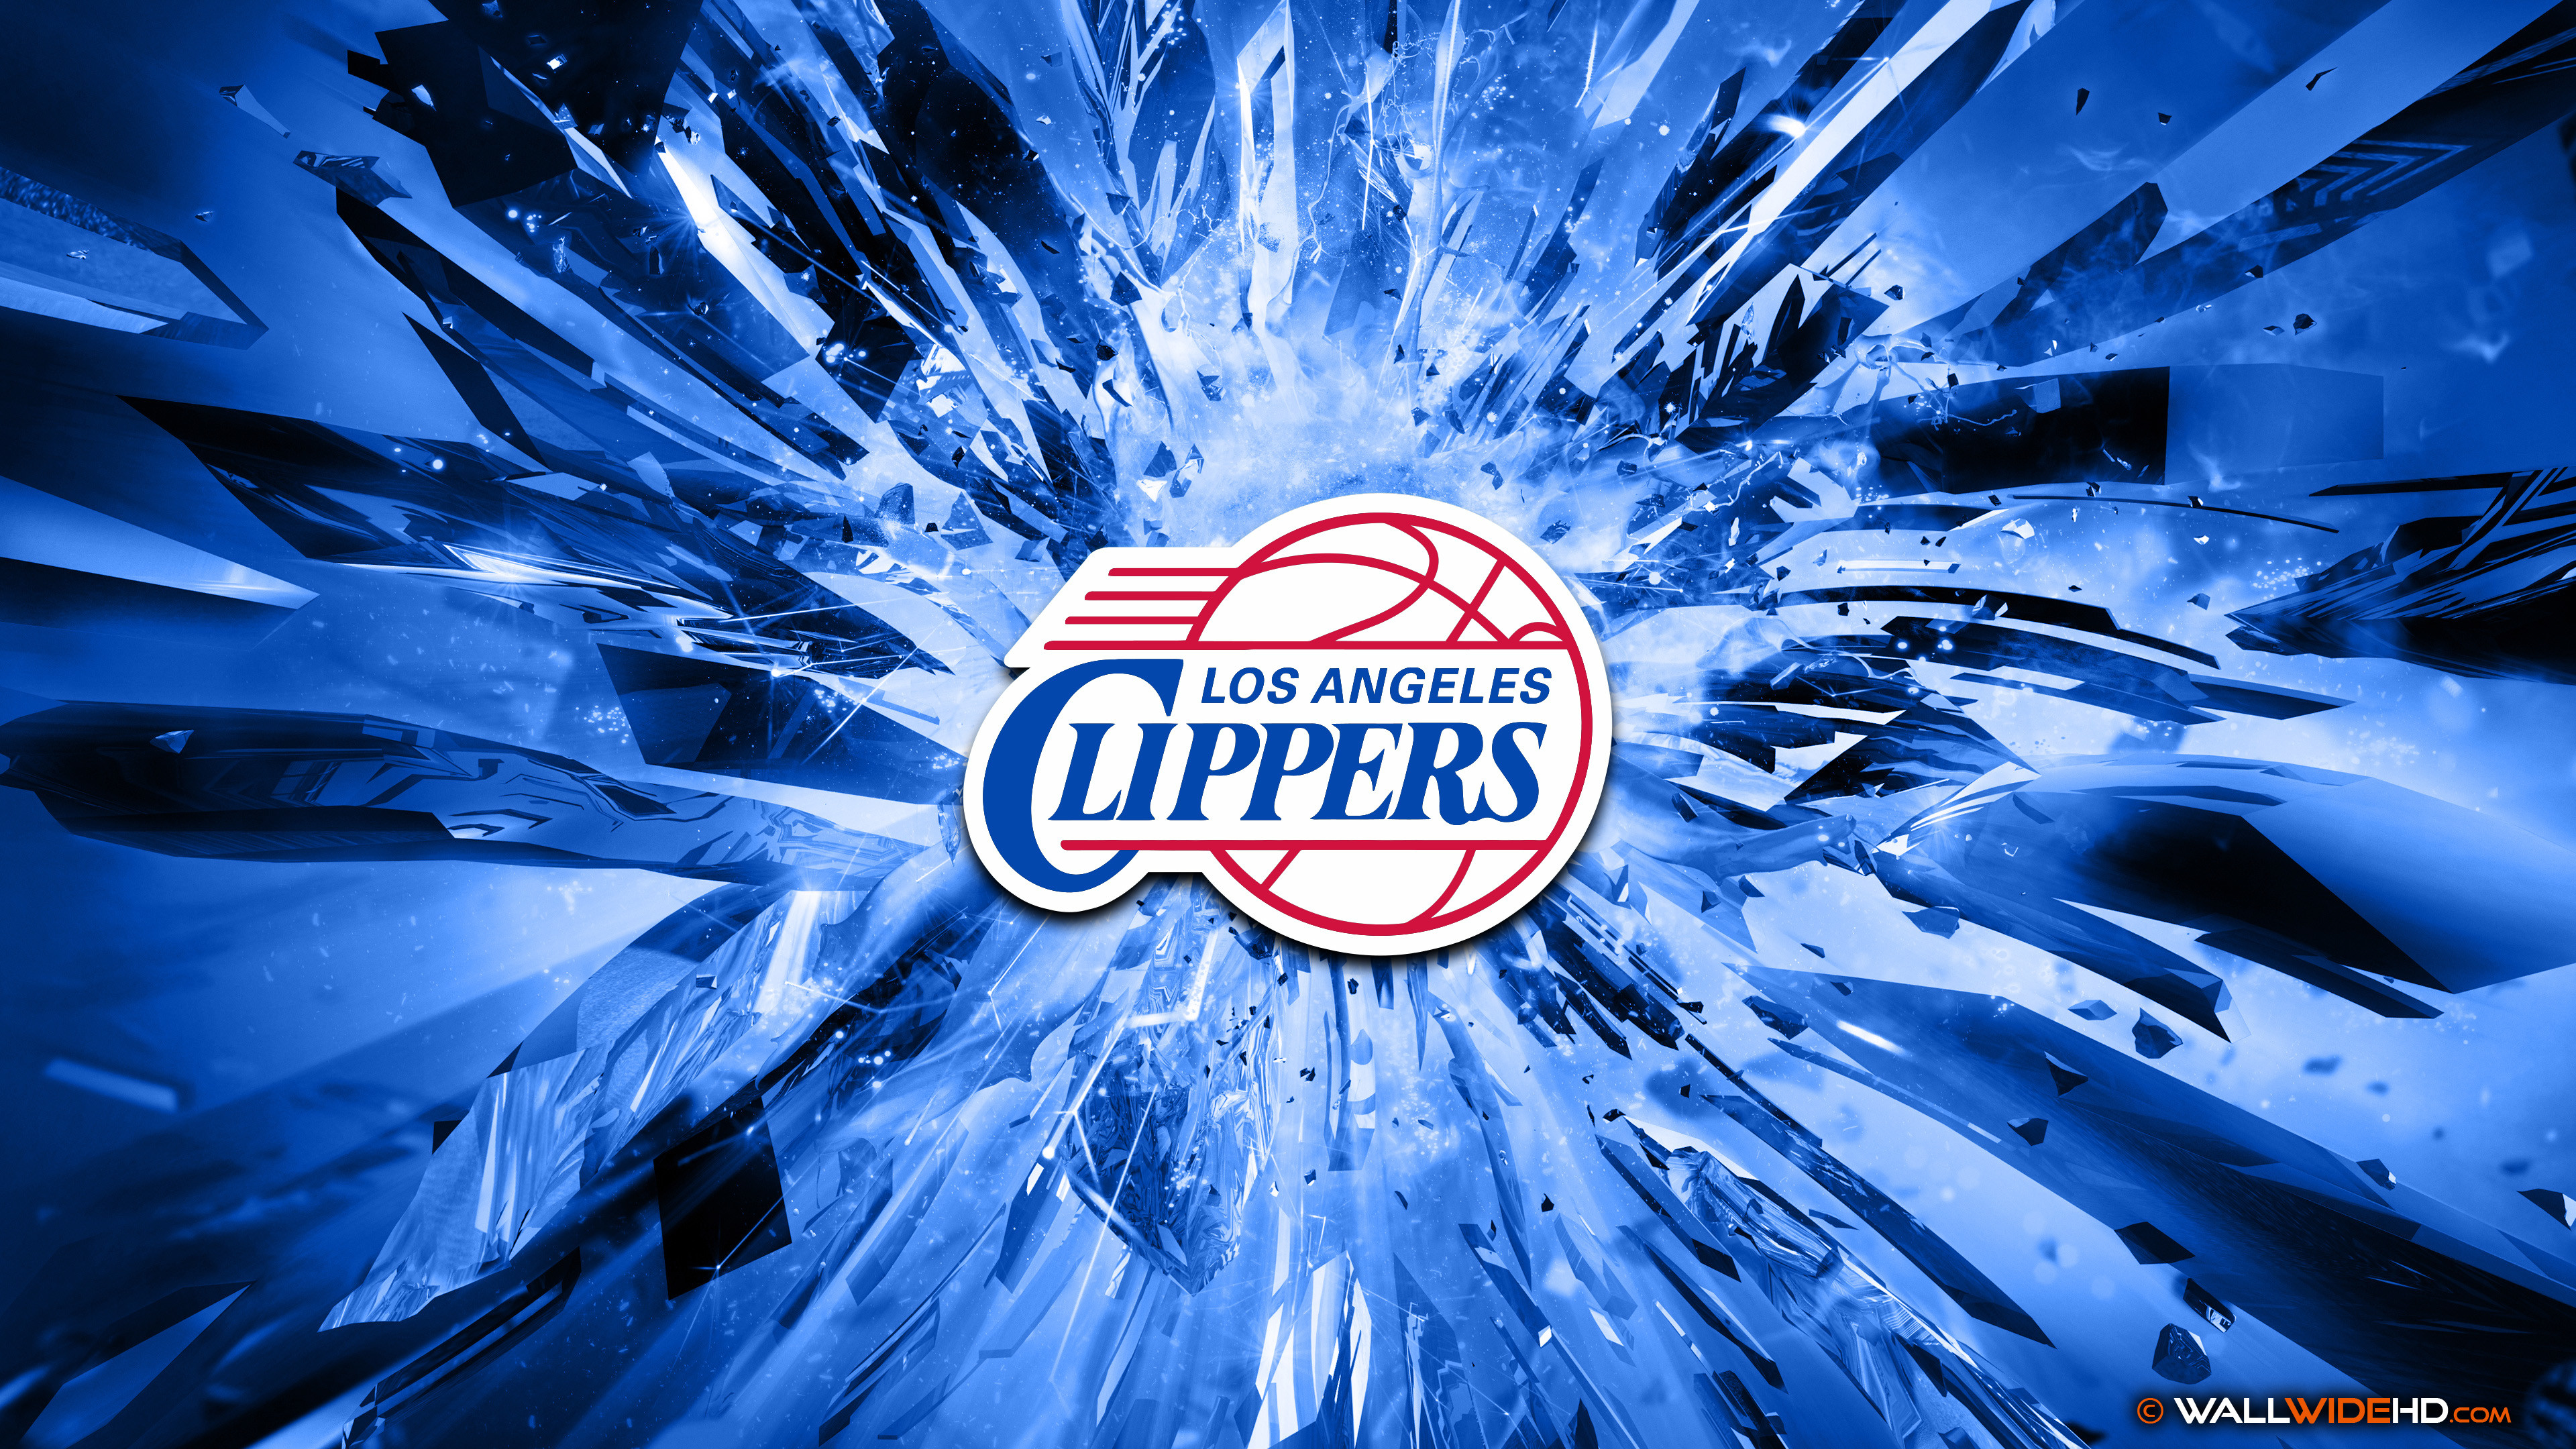 LA Clippers on Twitter Wouldnt be a Wednesday without wallpapers  WallpaperWednesday  httpstco2pS4XtkqwM  Twitter